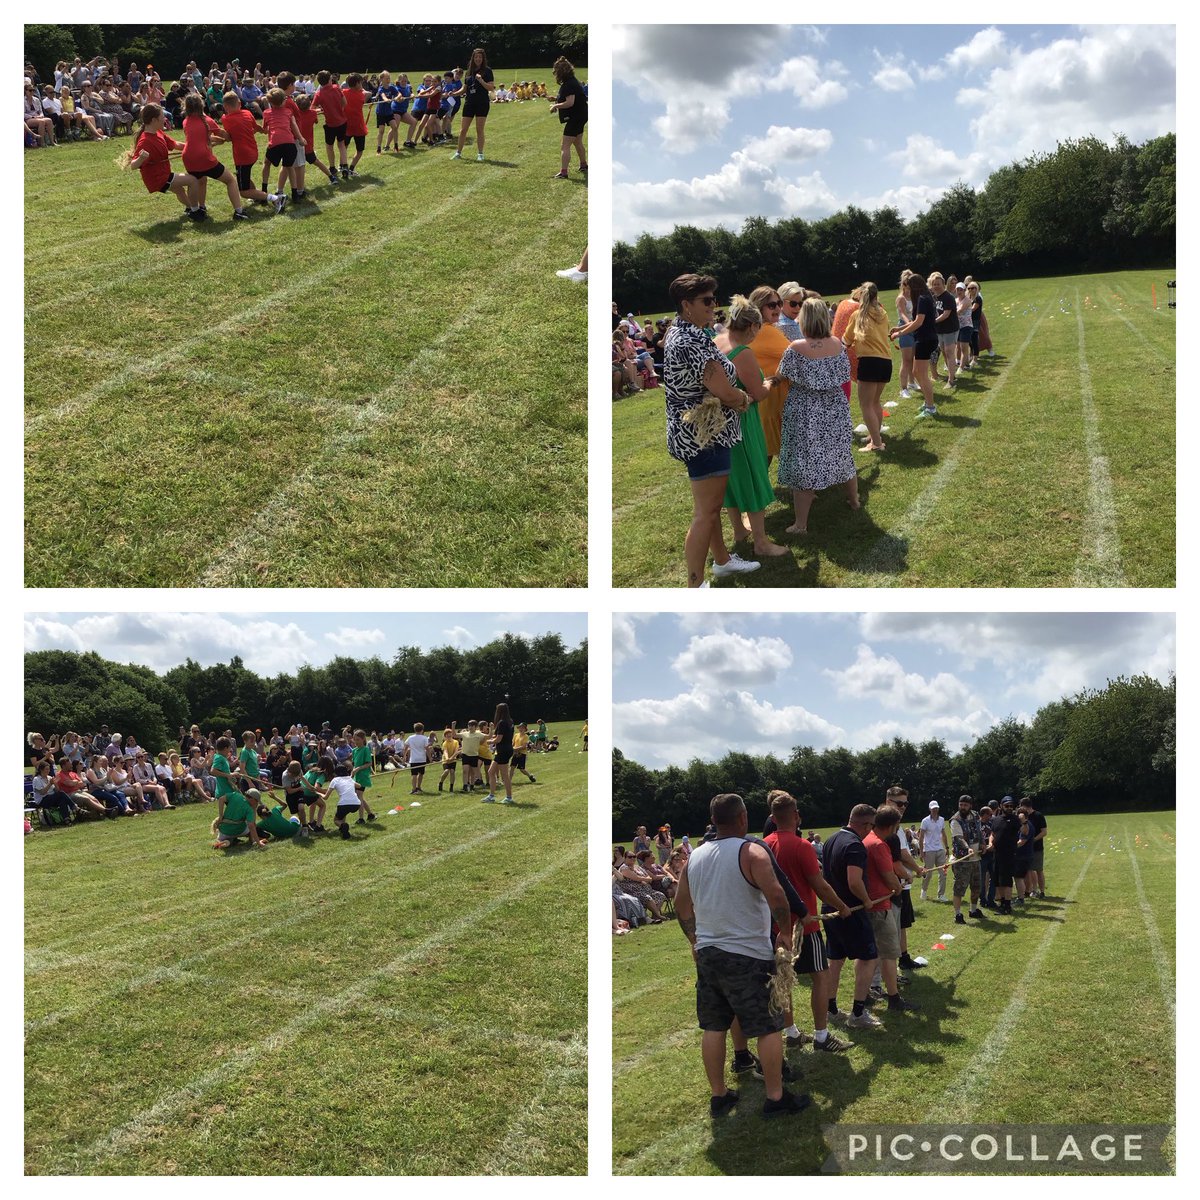 💙🏃 KS2 SPORTS DAY 🏃‍♀️💙

Well done everyone today on a fantastic sports day.
#weareastley #weareace 
@Astley_Primary